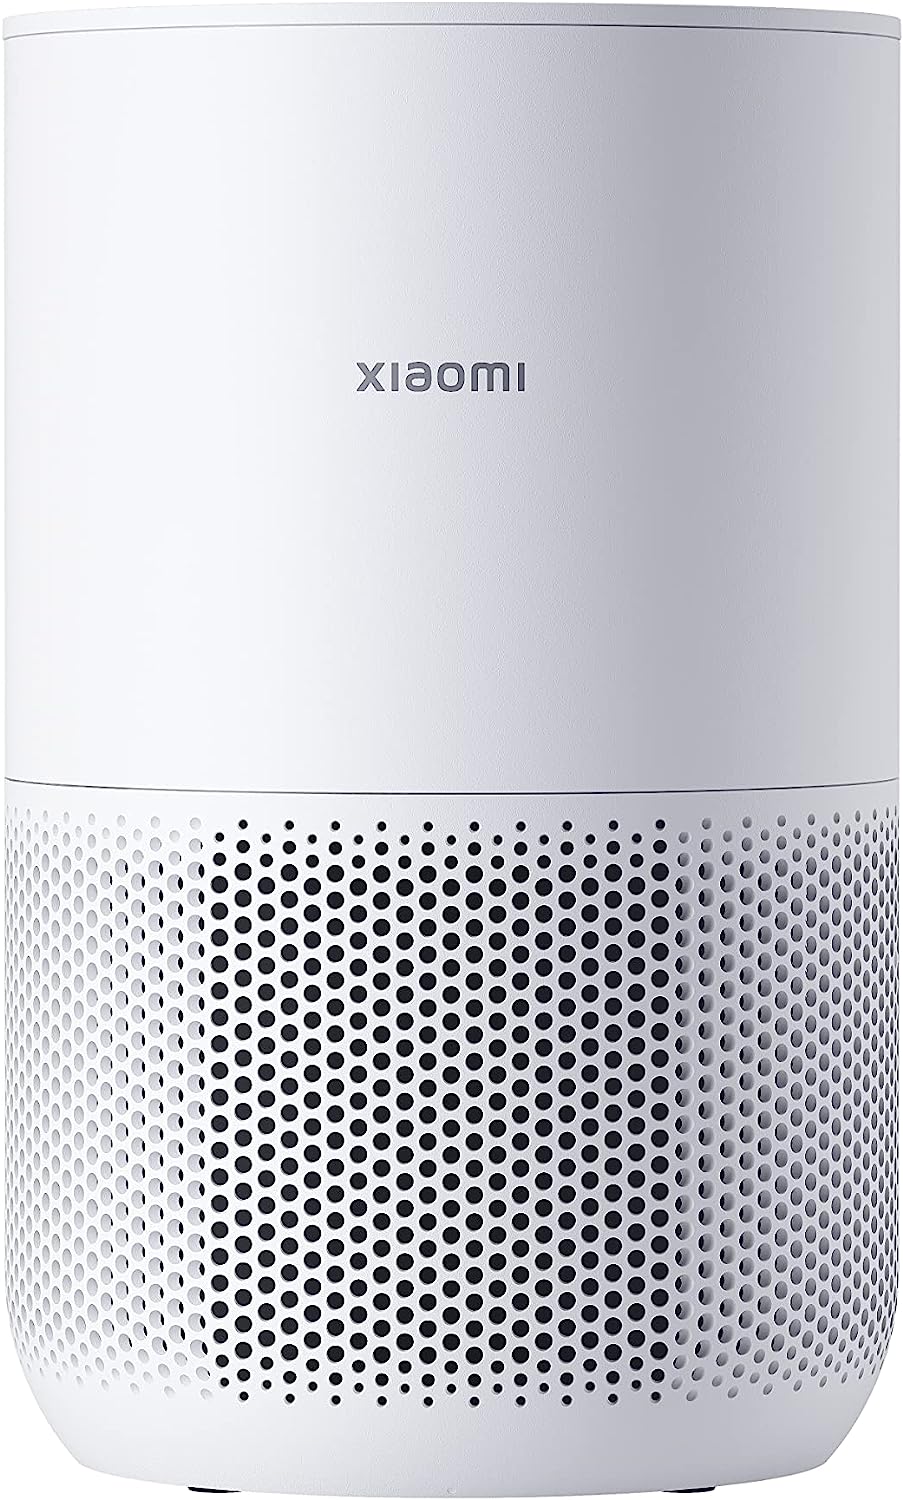 Xiaomi Smart Air Purifier 4 Compact Global Version (Up to 42m2 Room Size, Traps 99.97% of particles)